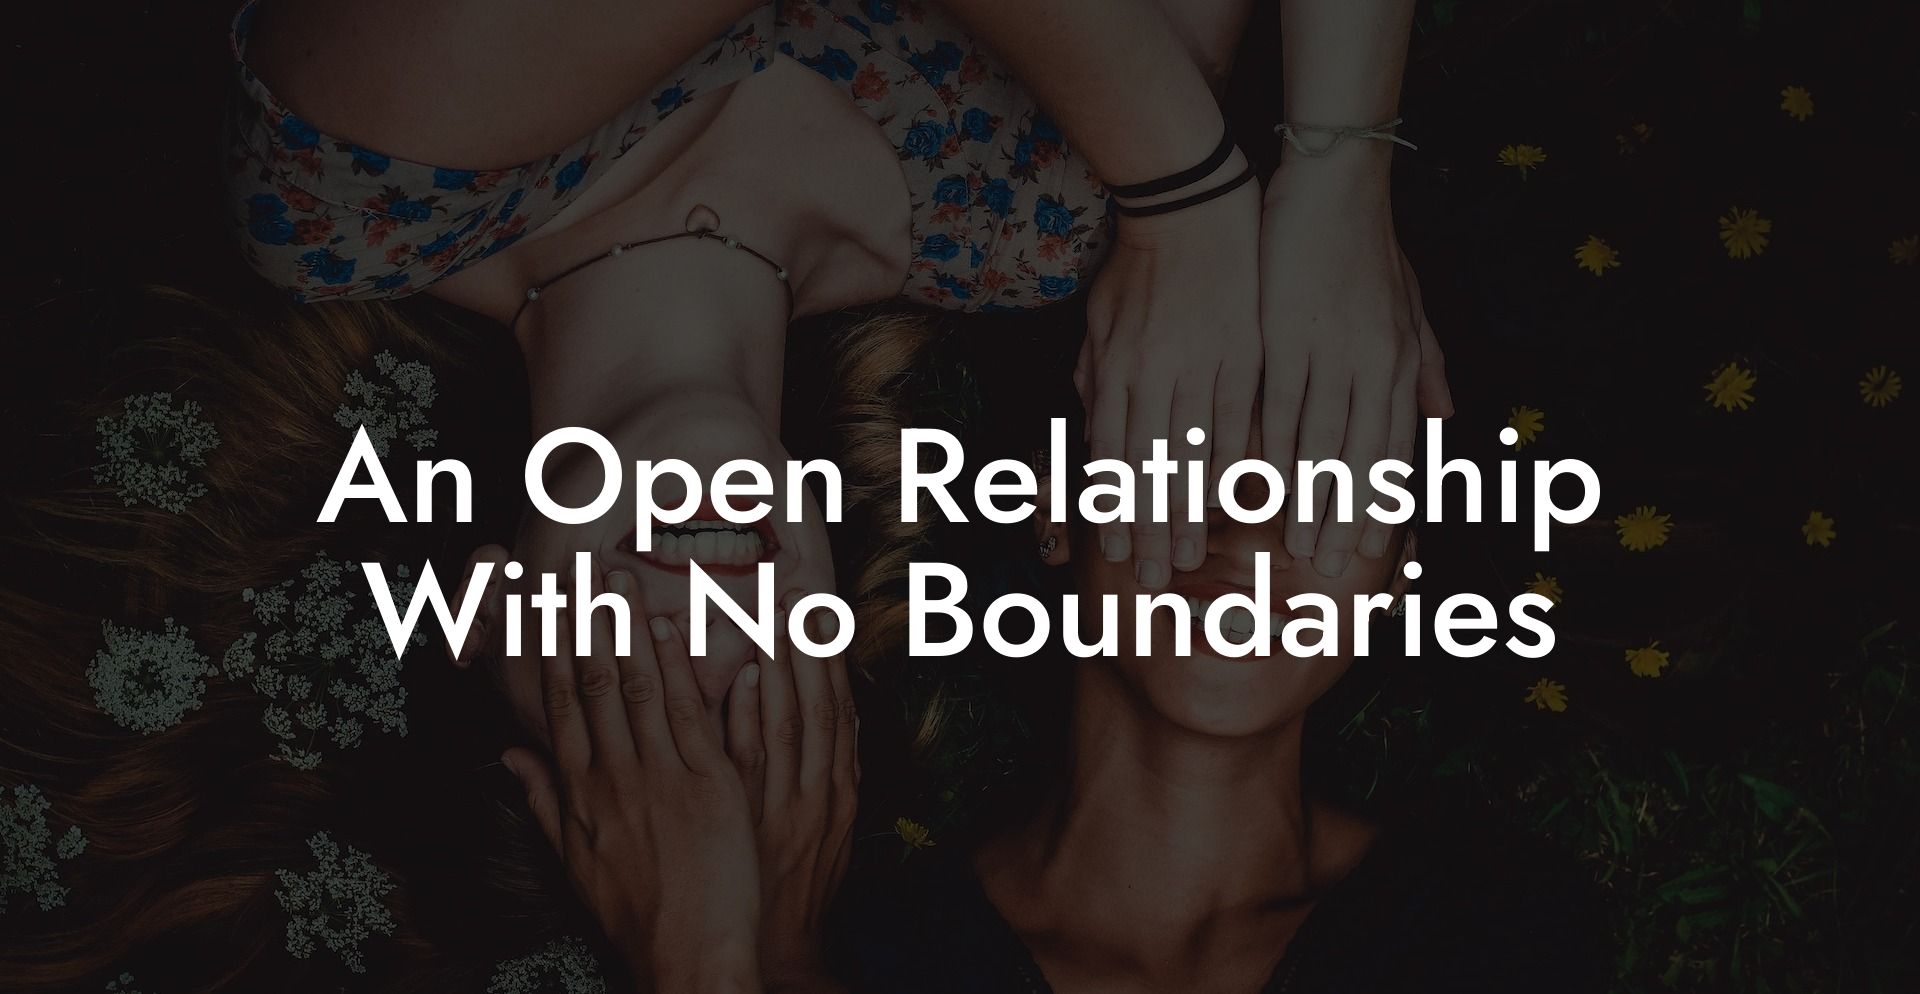 An Open Relationship With No Boundaries